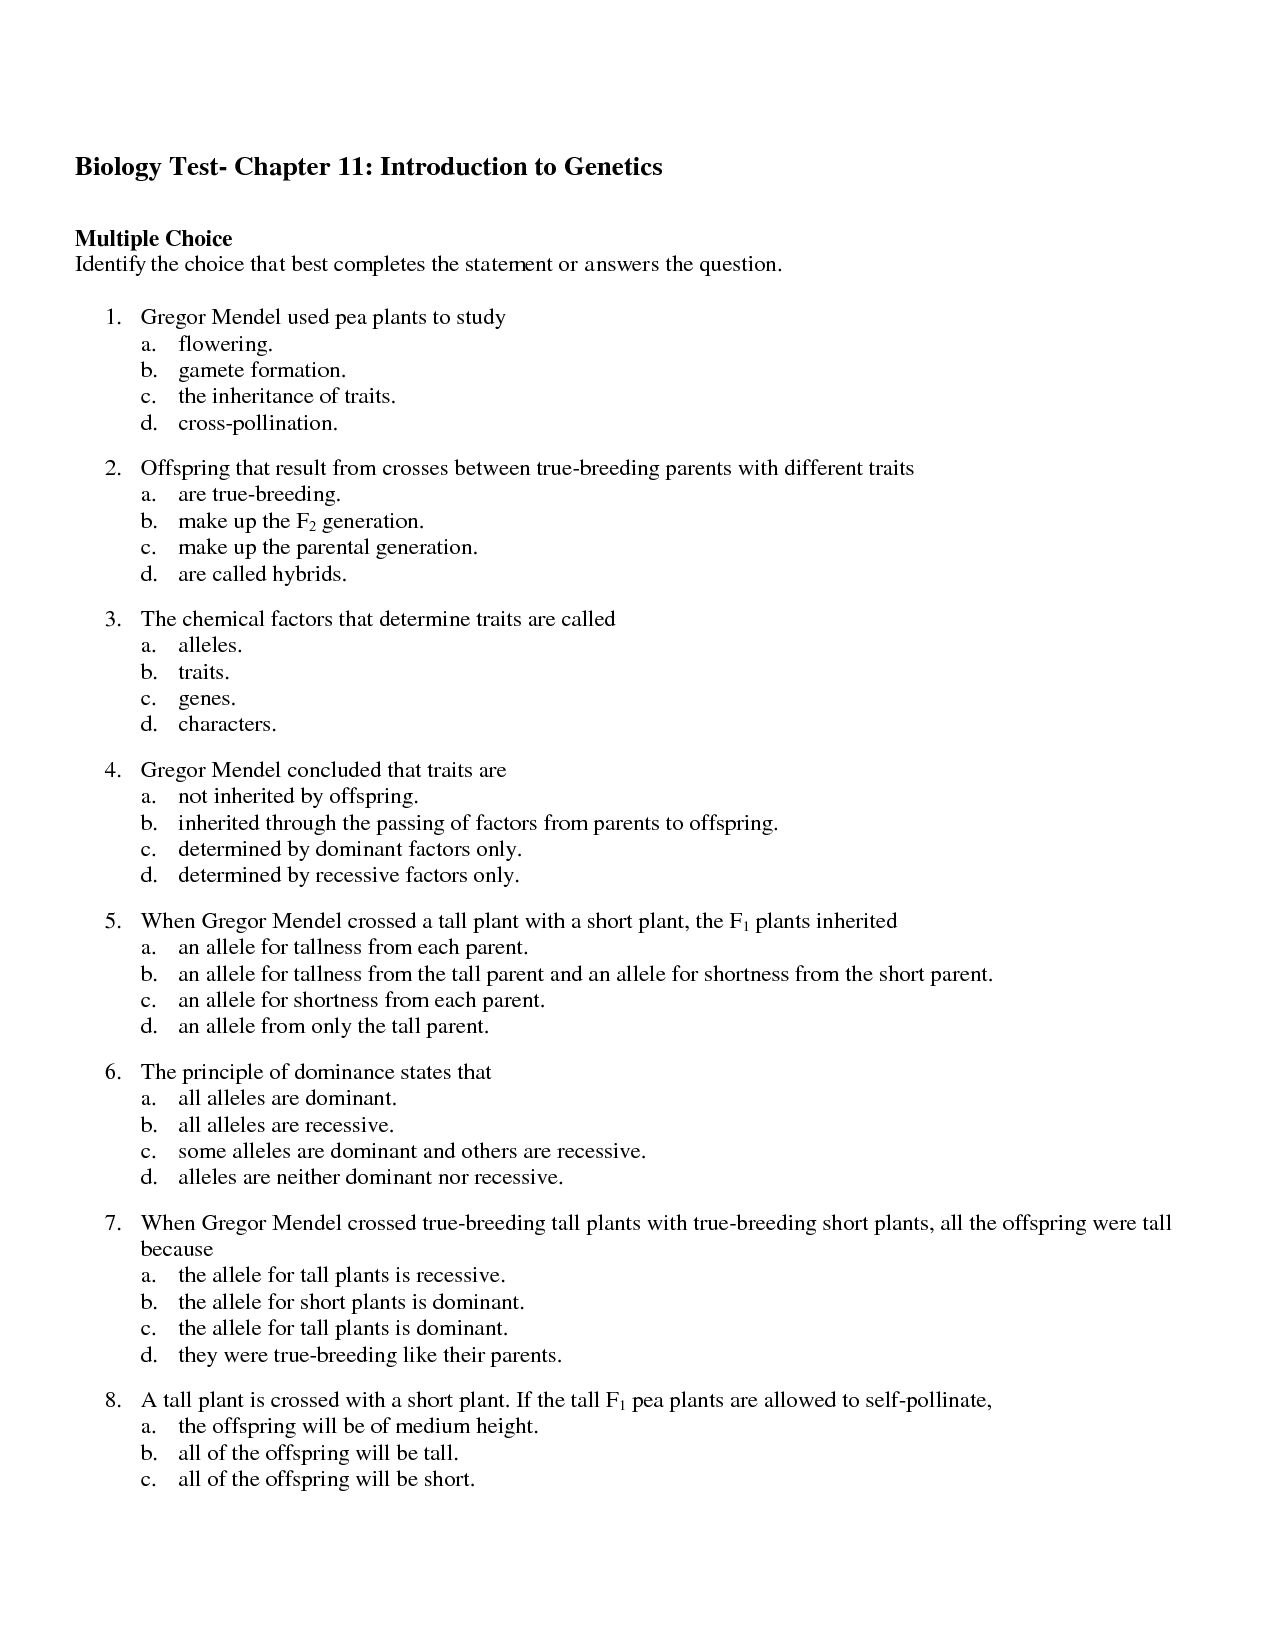 Section 111 Describing Chemical Reactions Worksheet Answers For Section 11 1 Describing Chemical Reactions Worksheet Answers